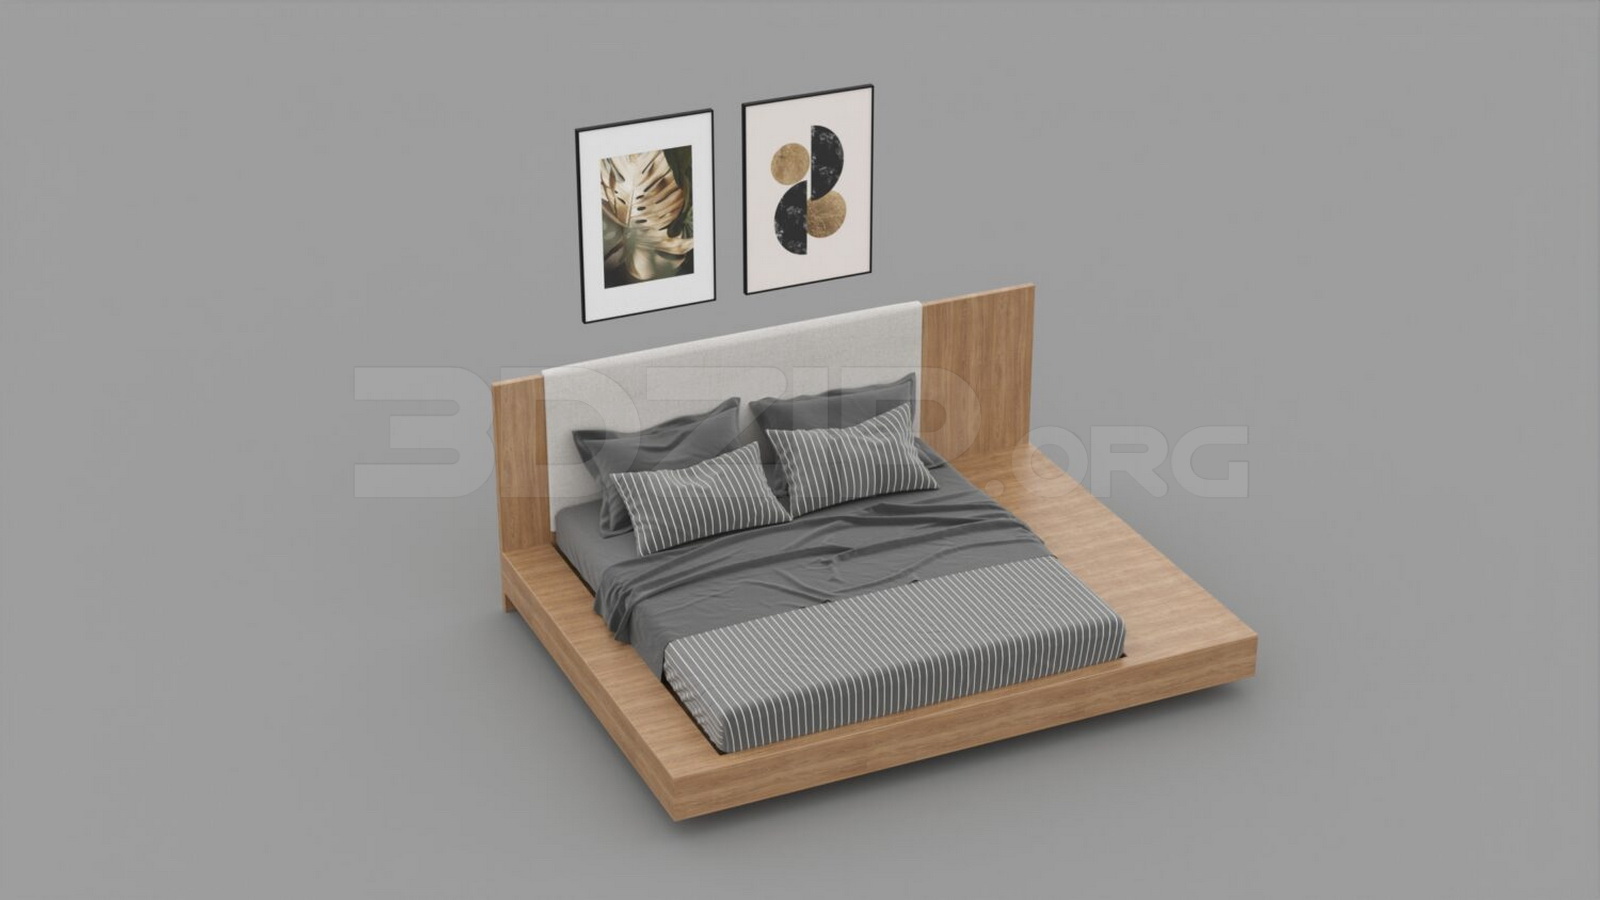 832. Download Free Bed Model By Nguyen Dinh Cau